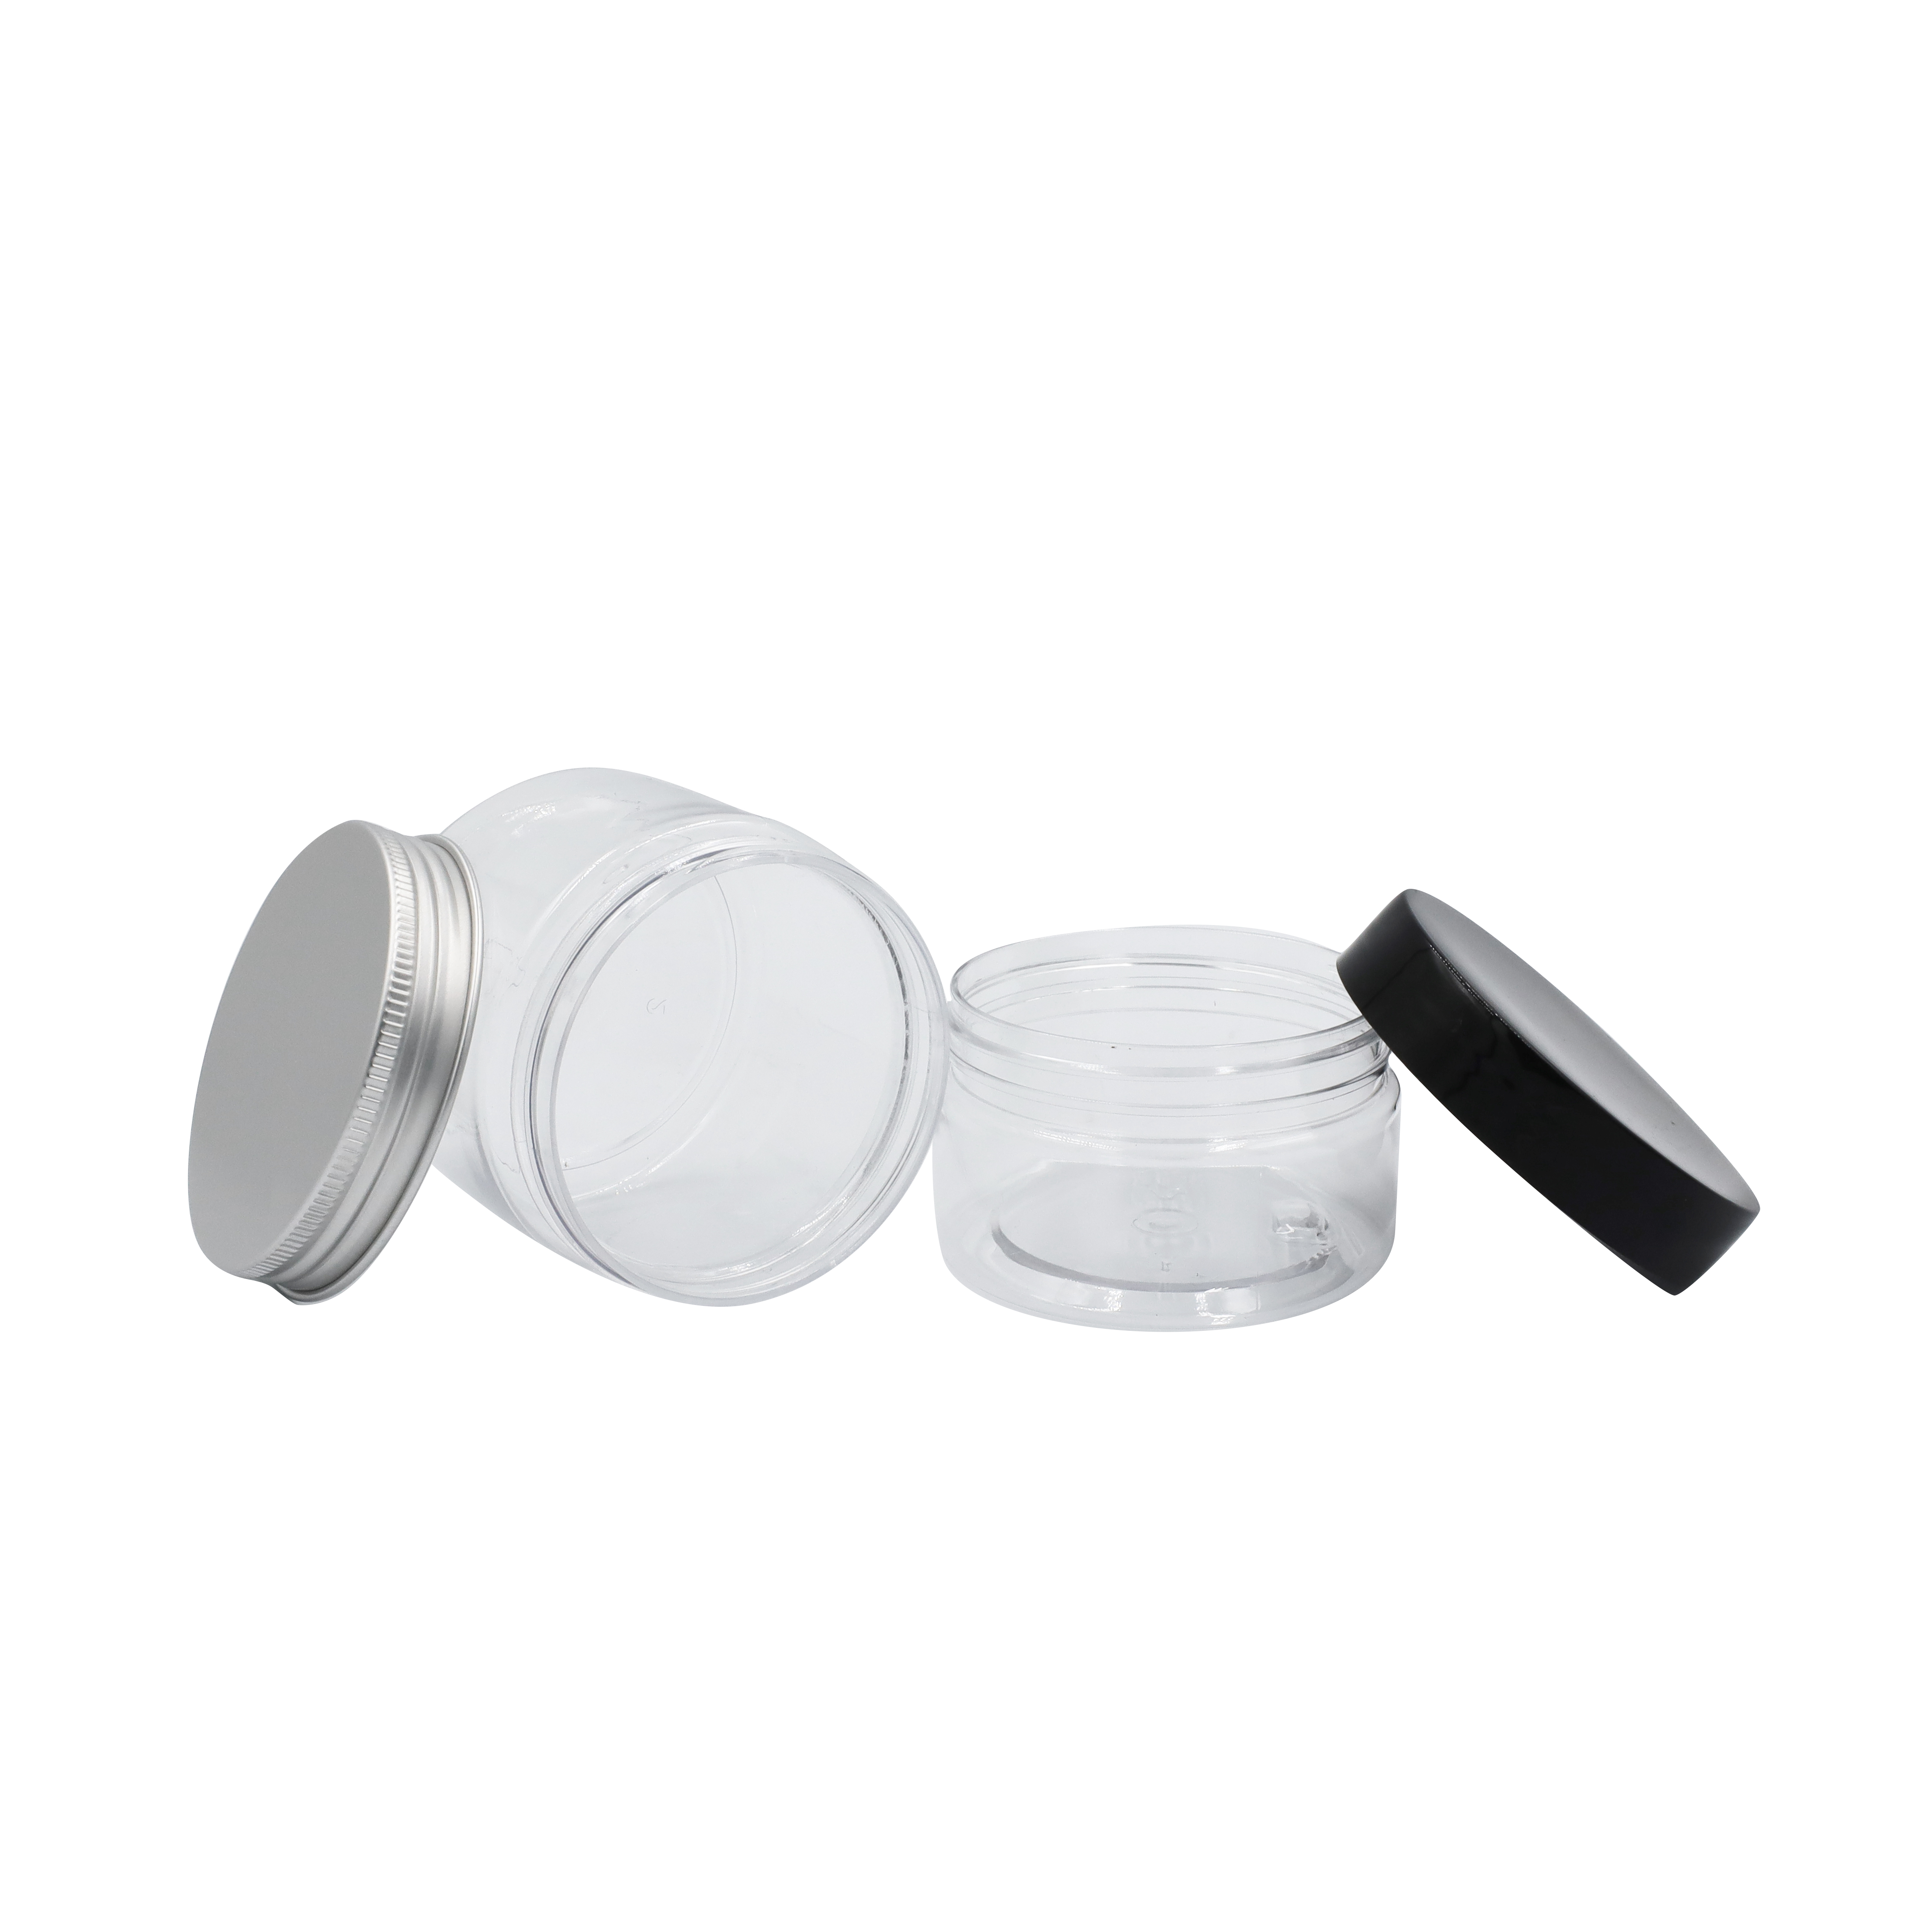 50ml 80ml 100ml 120ml 150ml 200ml 250ml Skin Care Cosmetic Containers Round PET Plastic Jars Containers